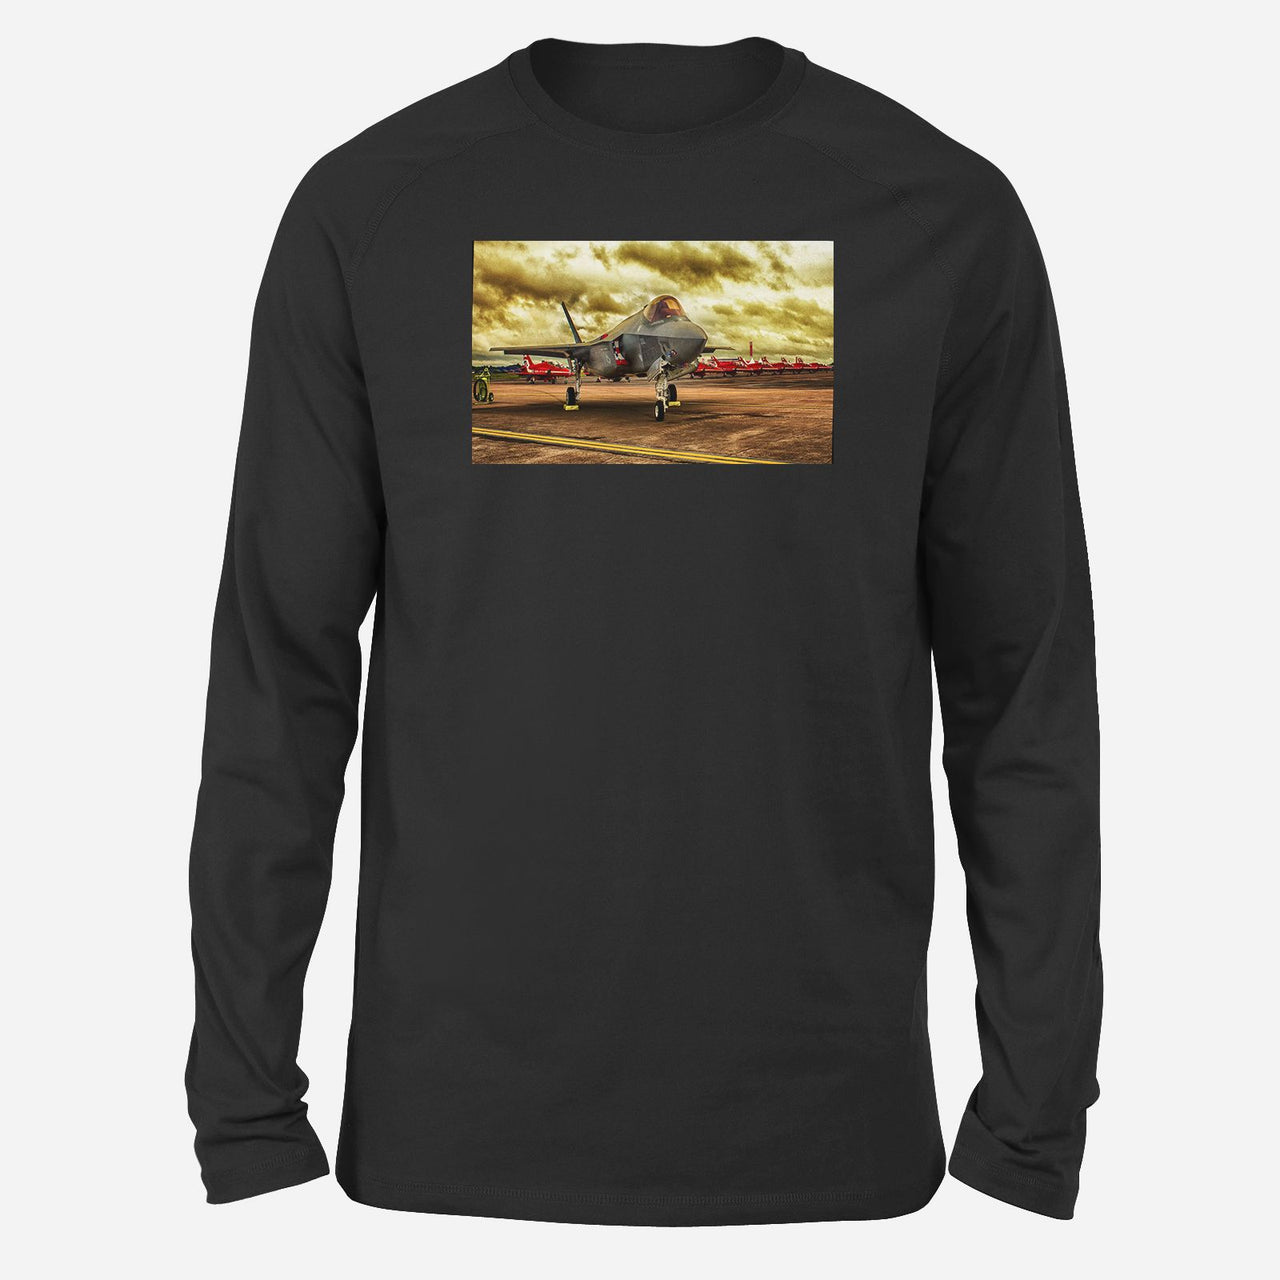 Fighting Falcon F35 at Airbase Designed Long-Sleeve T-Shirts